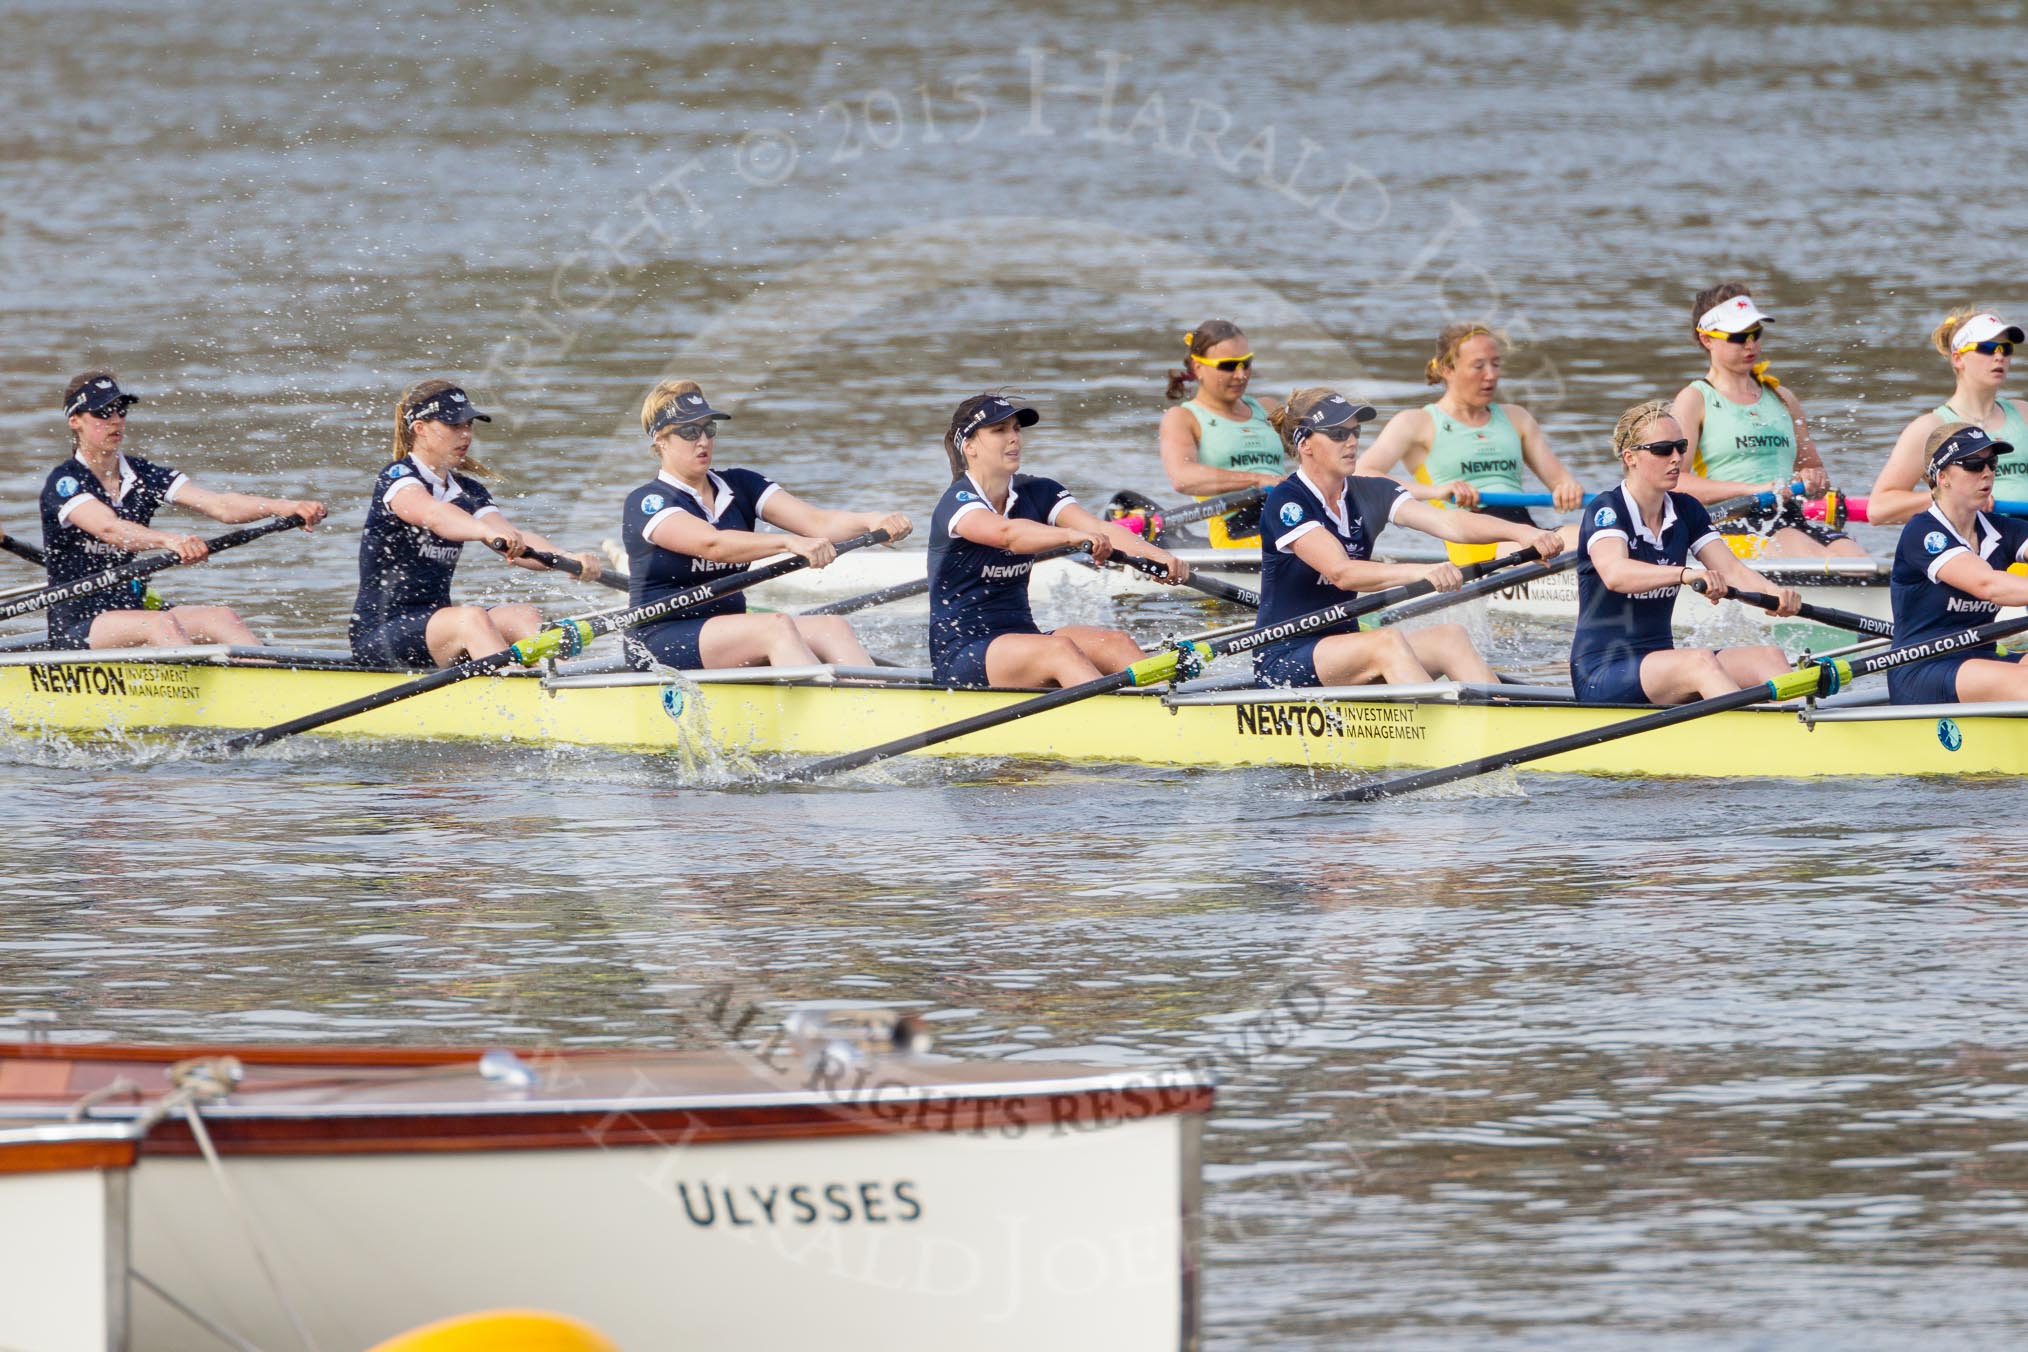 The Boat Race season 2015 - Newton Women's Boat Race.
River Thames between Putney and Mortlake,
London,

United Kingdom,
on 10 April 2015 at 16:03, image #130